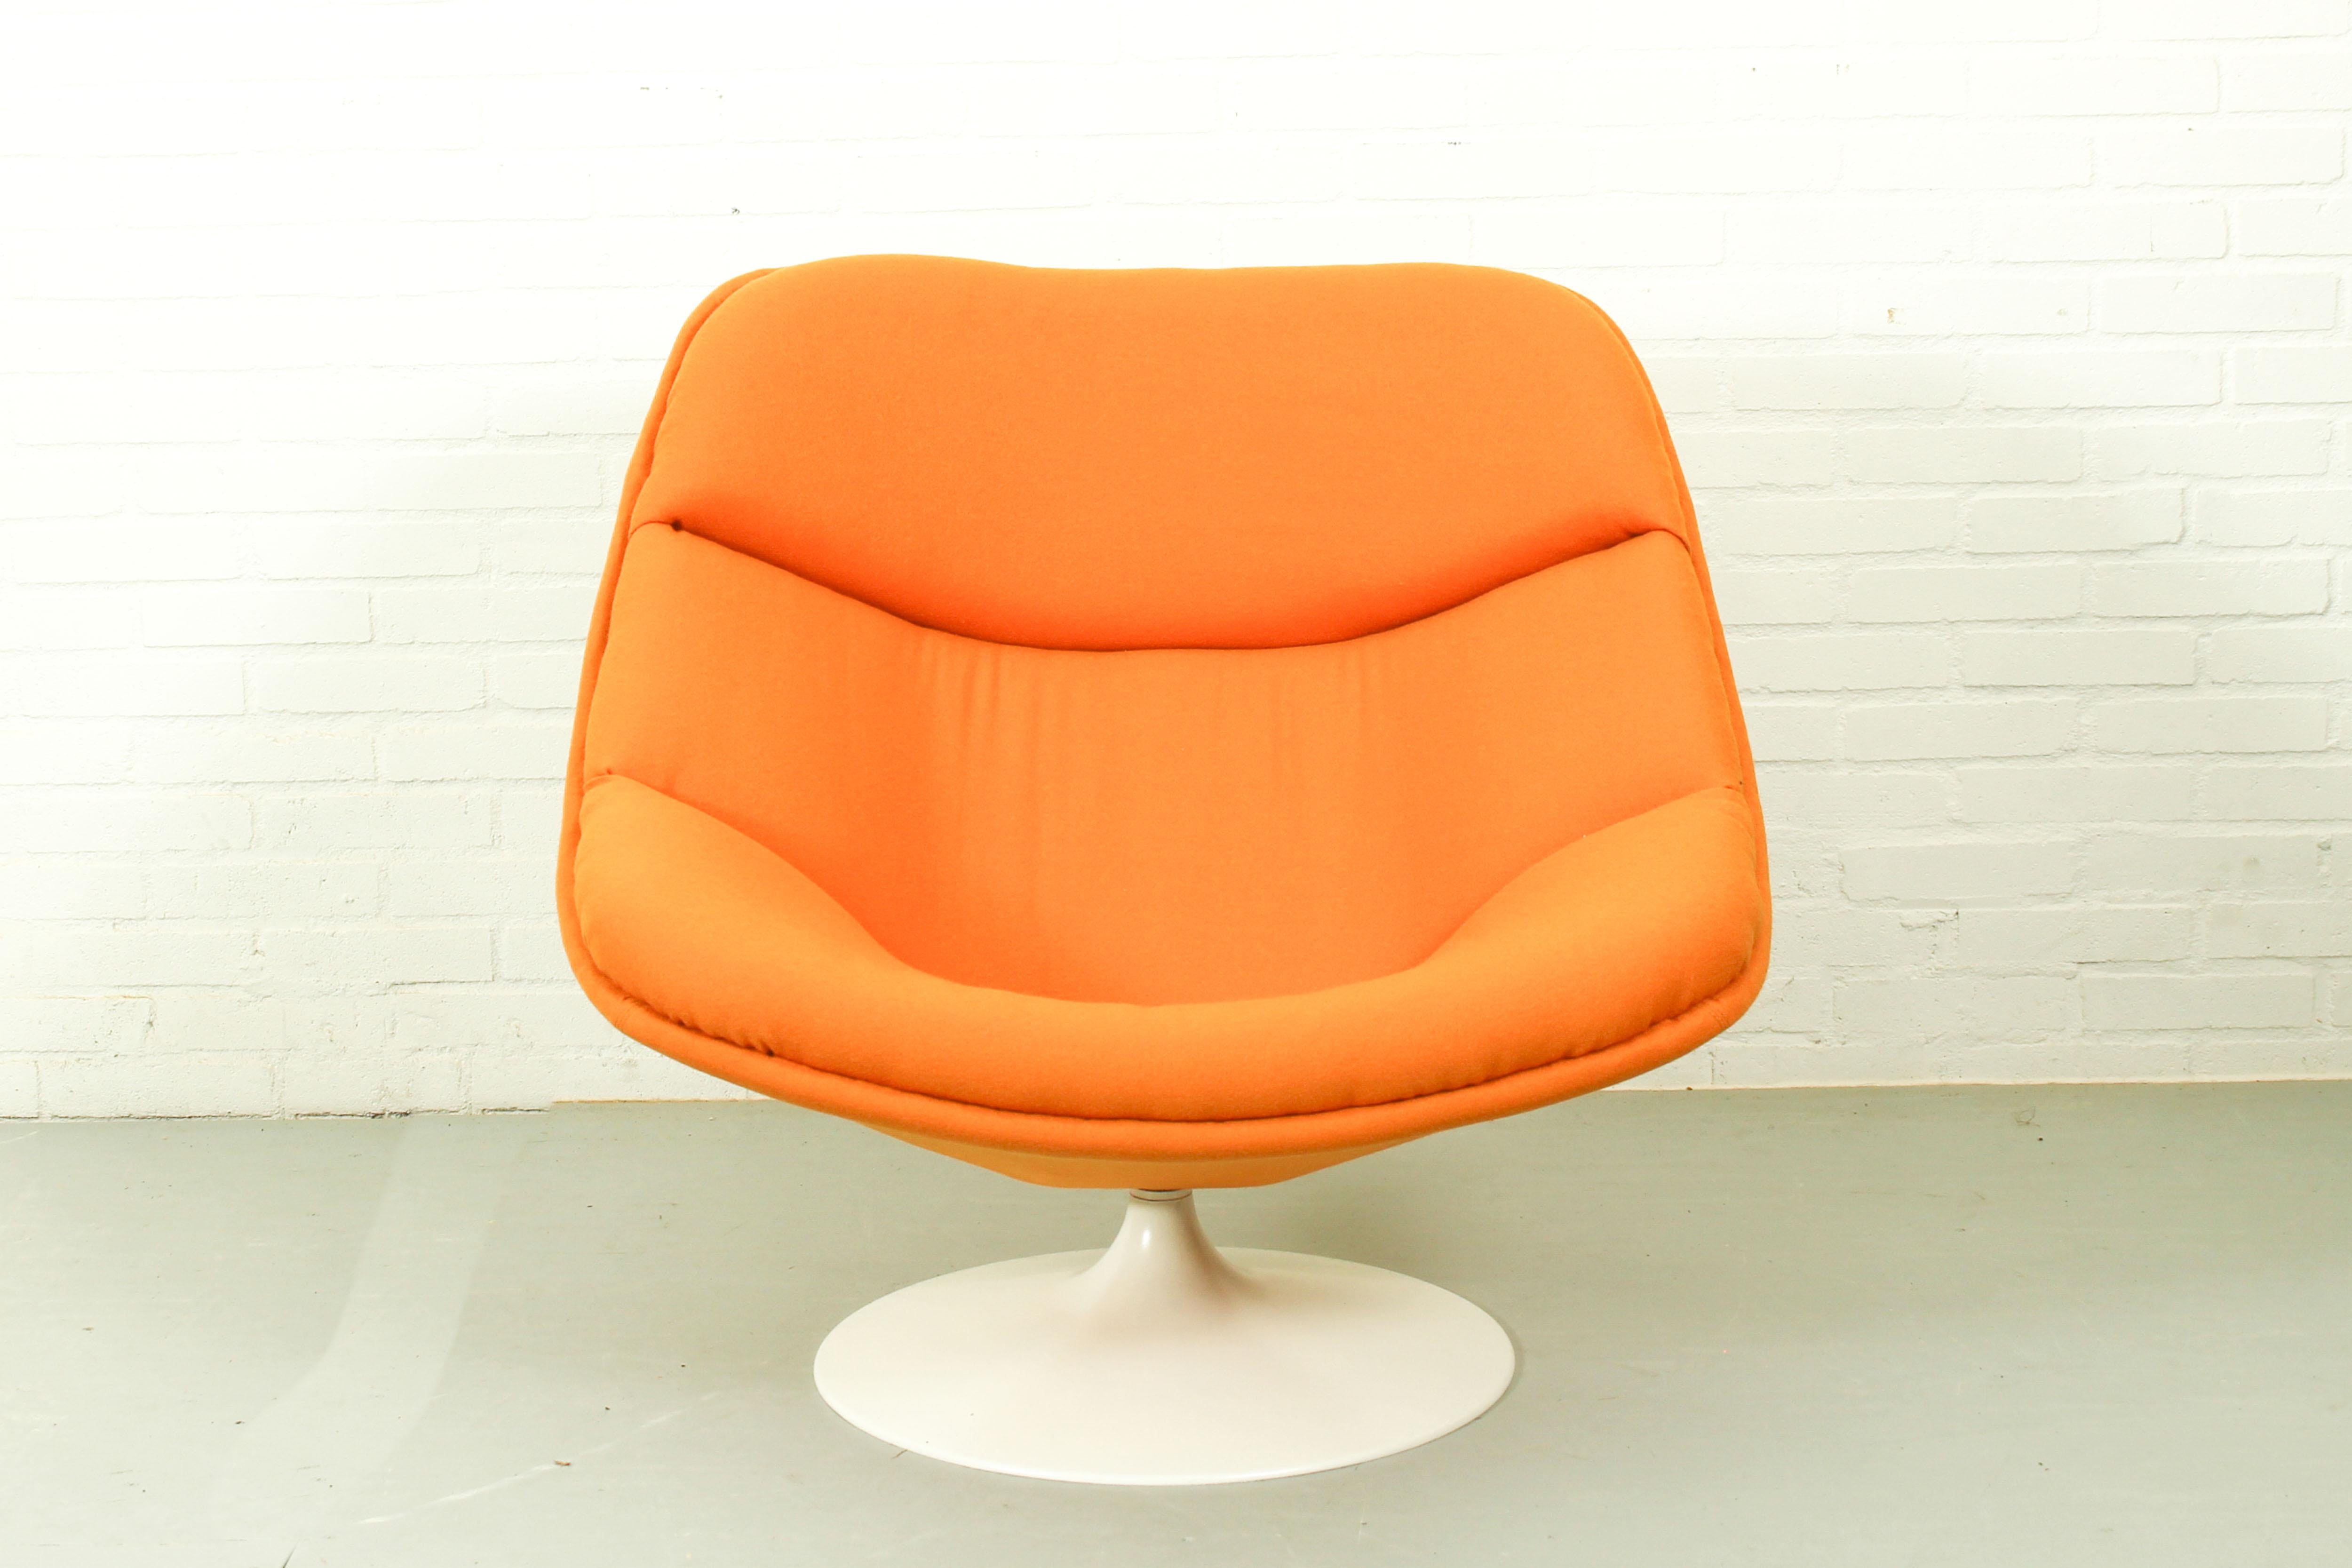 Lovely lounge chair, designed by Pierre Paulin in 1961. Very comfortable pivoting lounge chair. This model F557 is the first edition of the Oyster Chair and is shortly produced (till 1965), that's why this chair is rare. The chair is completely